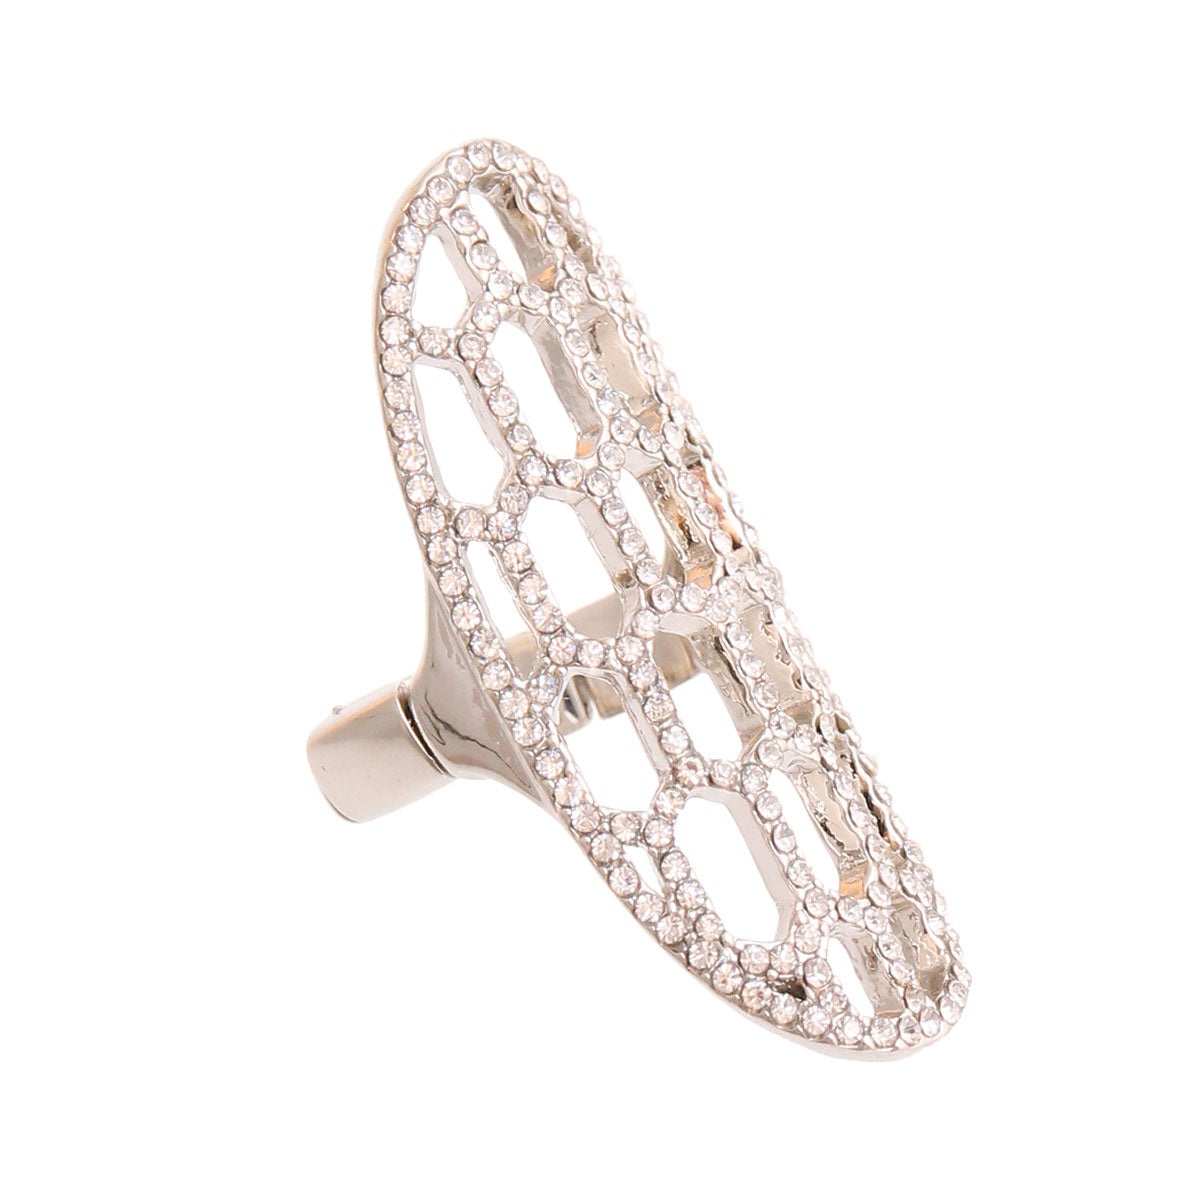 Silver Honeycomb Cocktail Ring